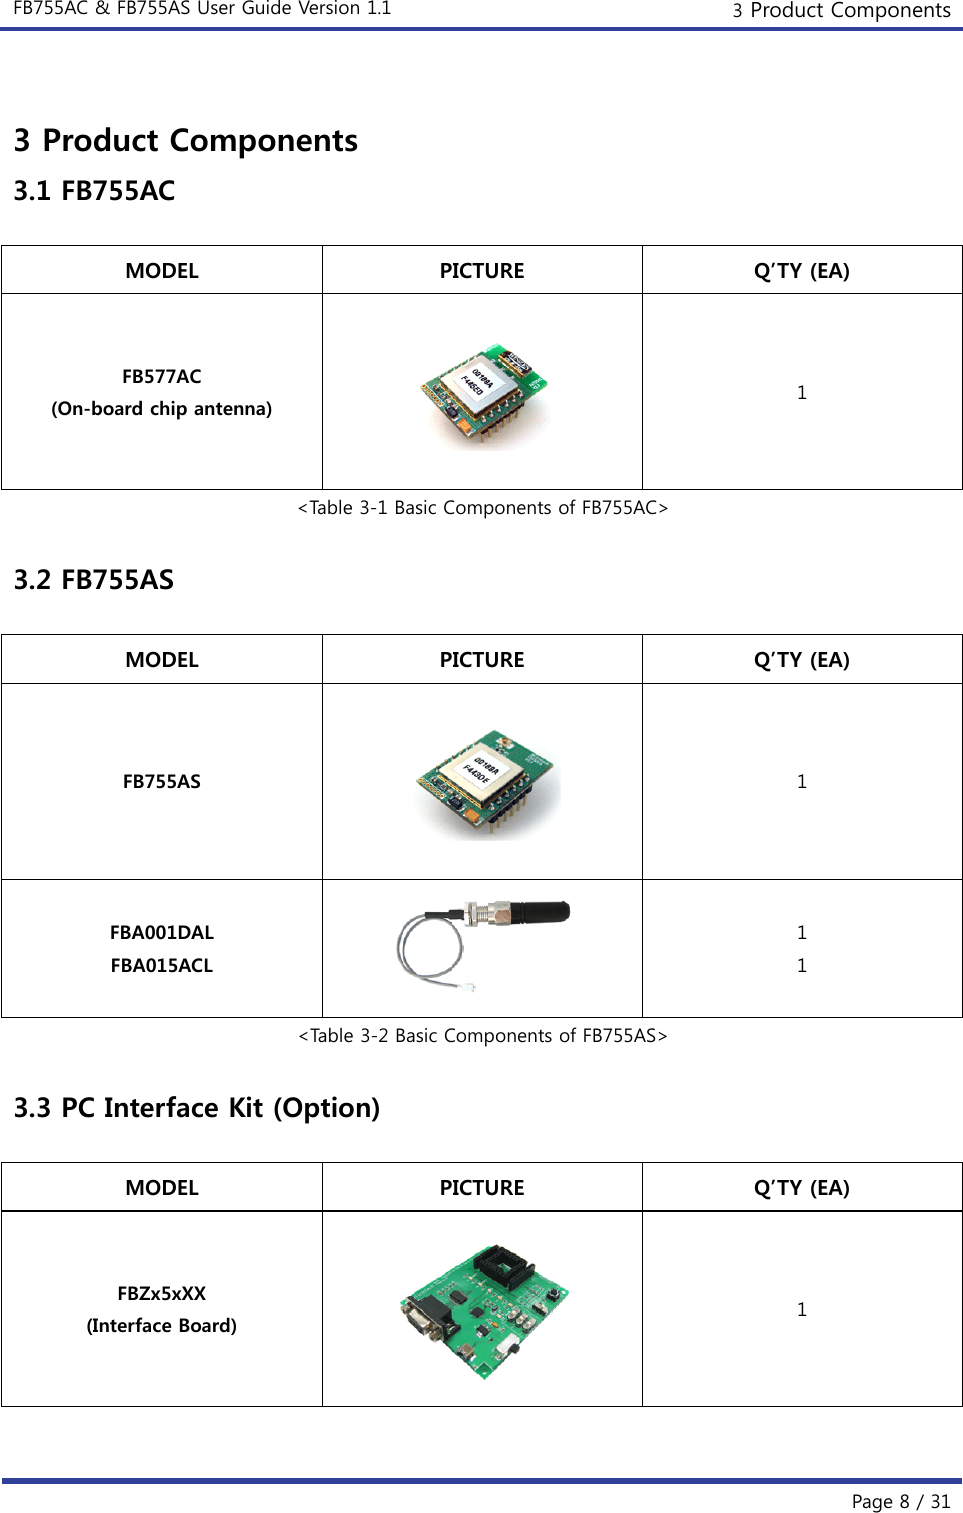 FB755AC &amp; FB755AS User Guide Version 1.1  3 Product Components  Page 8 / 31  3 Product Components 3.1 FB755AC  MODEL  PICTURE  Q’TY (EA) FB577AC (On-board chip antenna)  1 &lt;Table 3-1 Basic Components of FB755AC&gt;  3.2 FB755AS  MODEL  PICTURE  Q’TY (EA) FB755AS  1 FBA001DAL FBA015ACL  1 1 &lt;Table 3-2 Basic Components of FB755AS&gt;  3.3 PC Interface Kit (Option)  MODEL  PICTURE  Q’TY (EA) FBZx5xXX (Interface Board)  1 